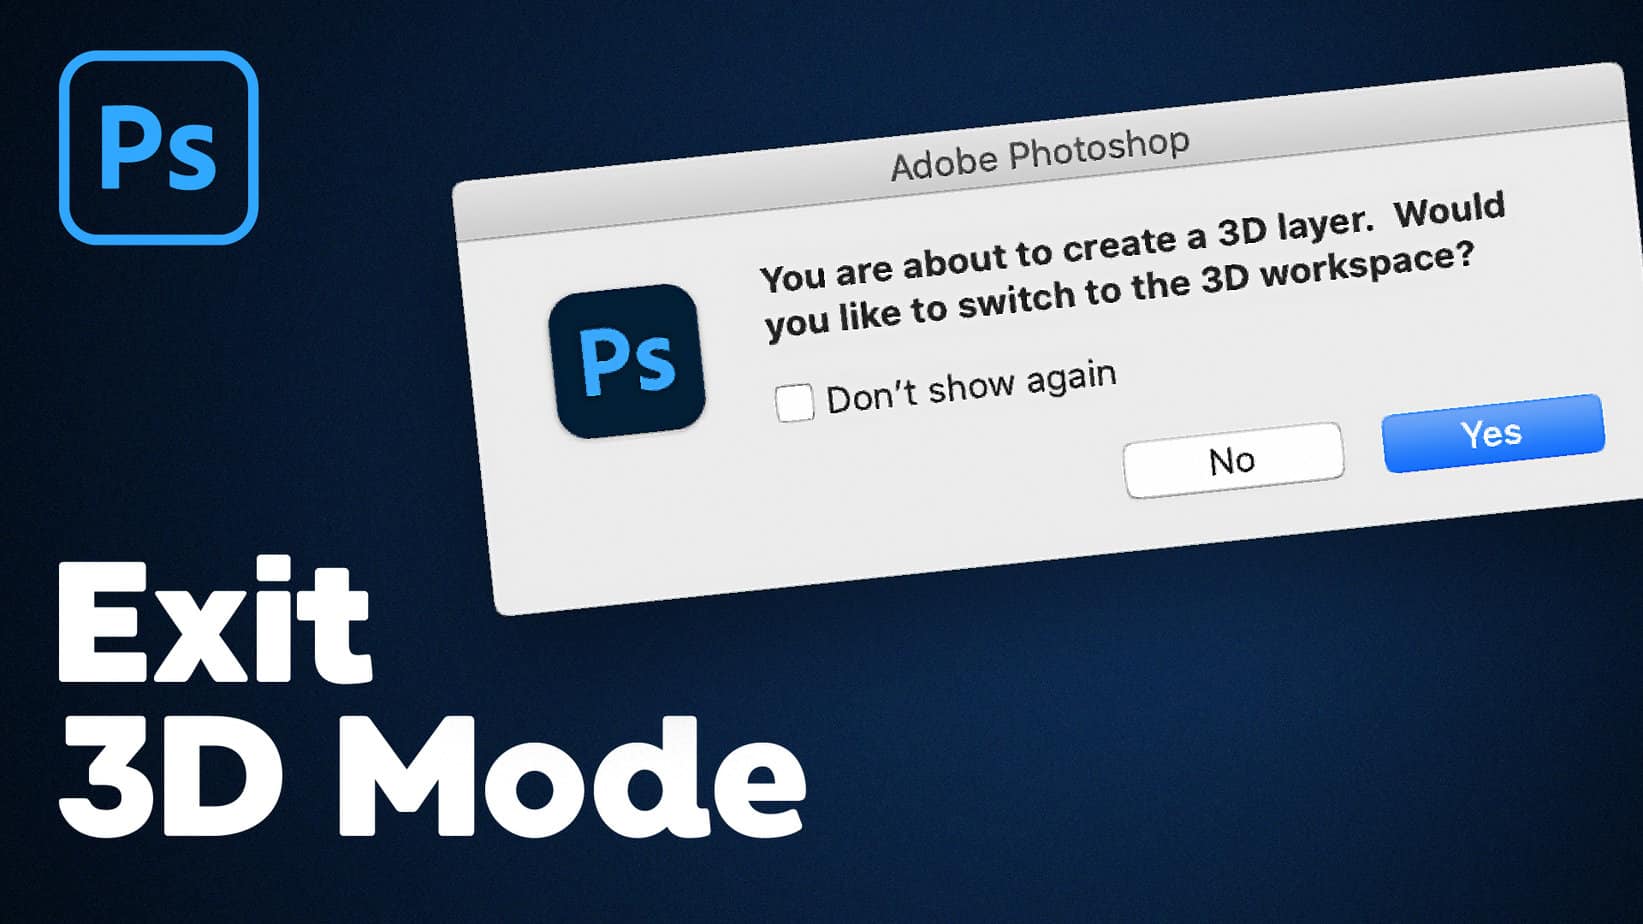 How to Get Out of 3D Mode in Photoshop